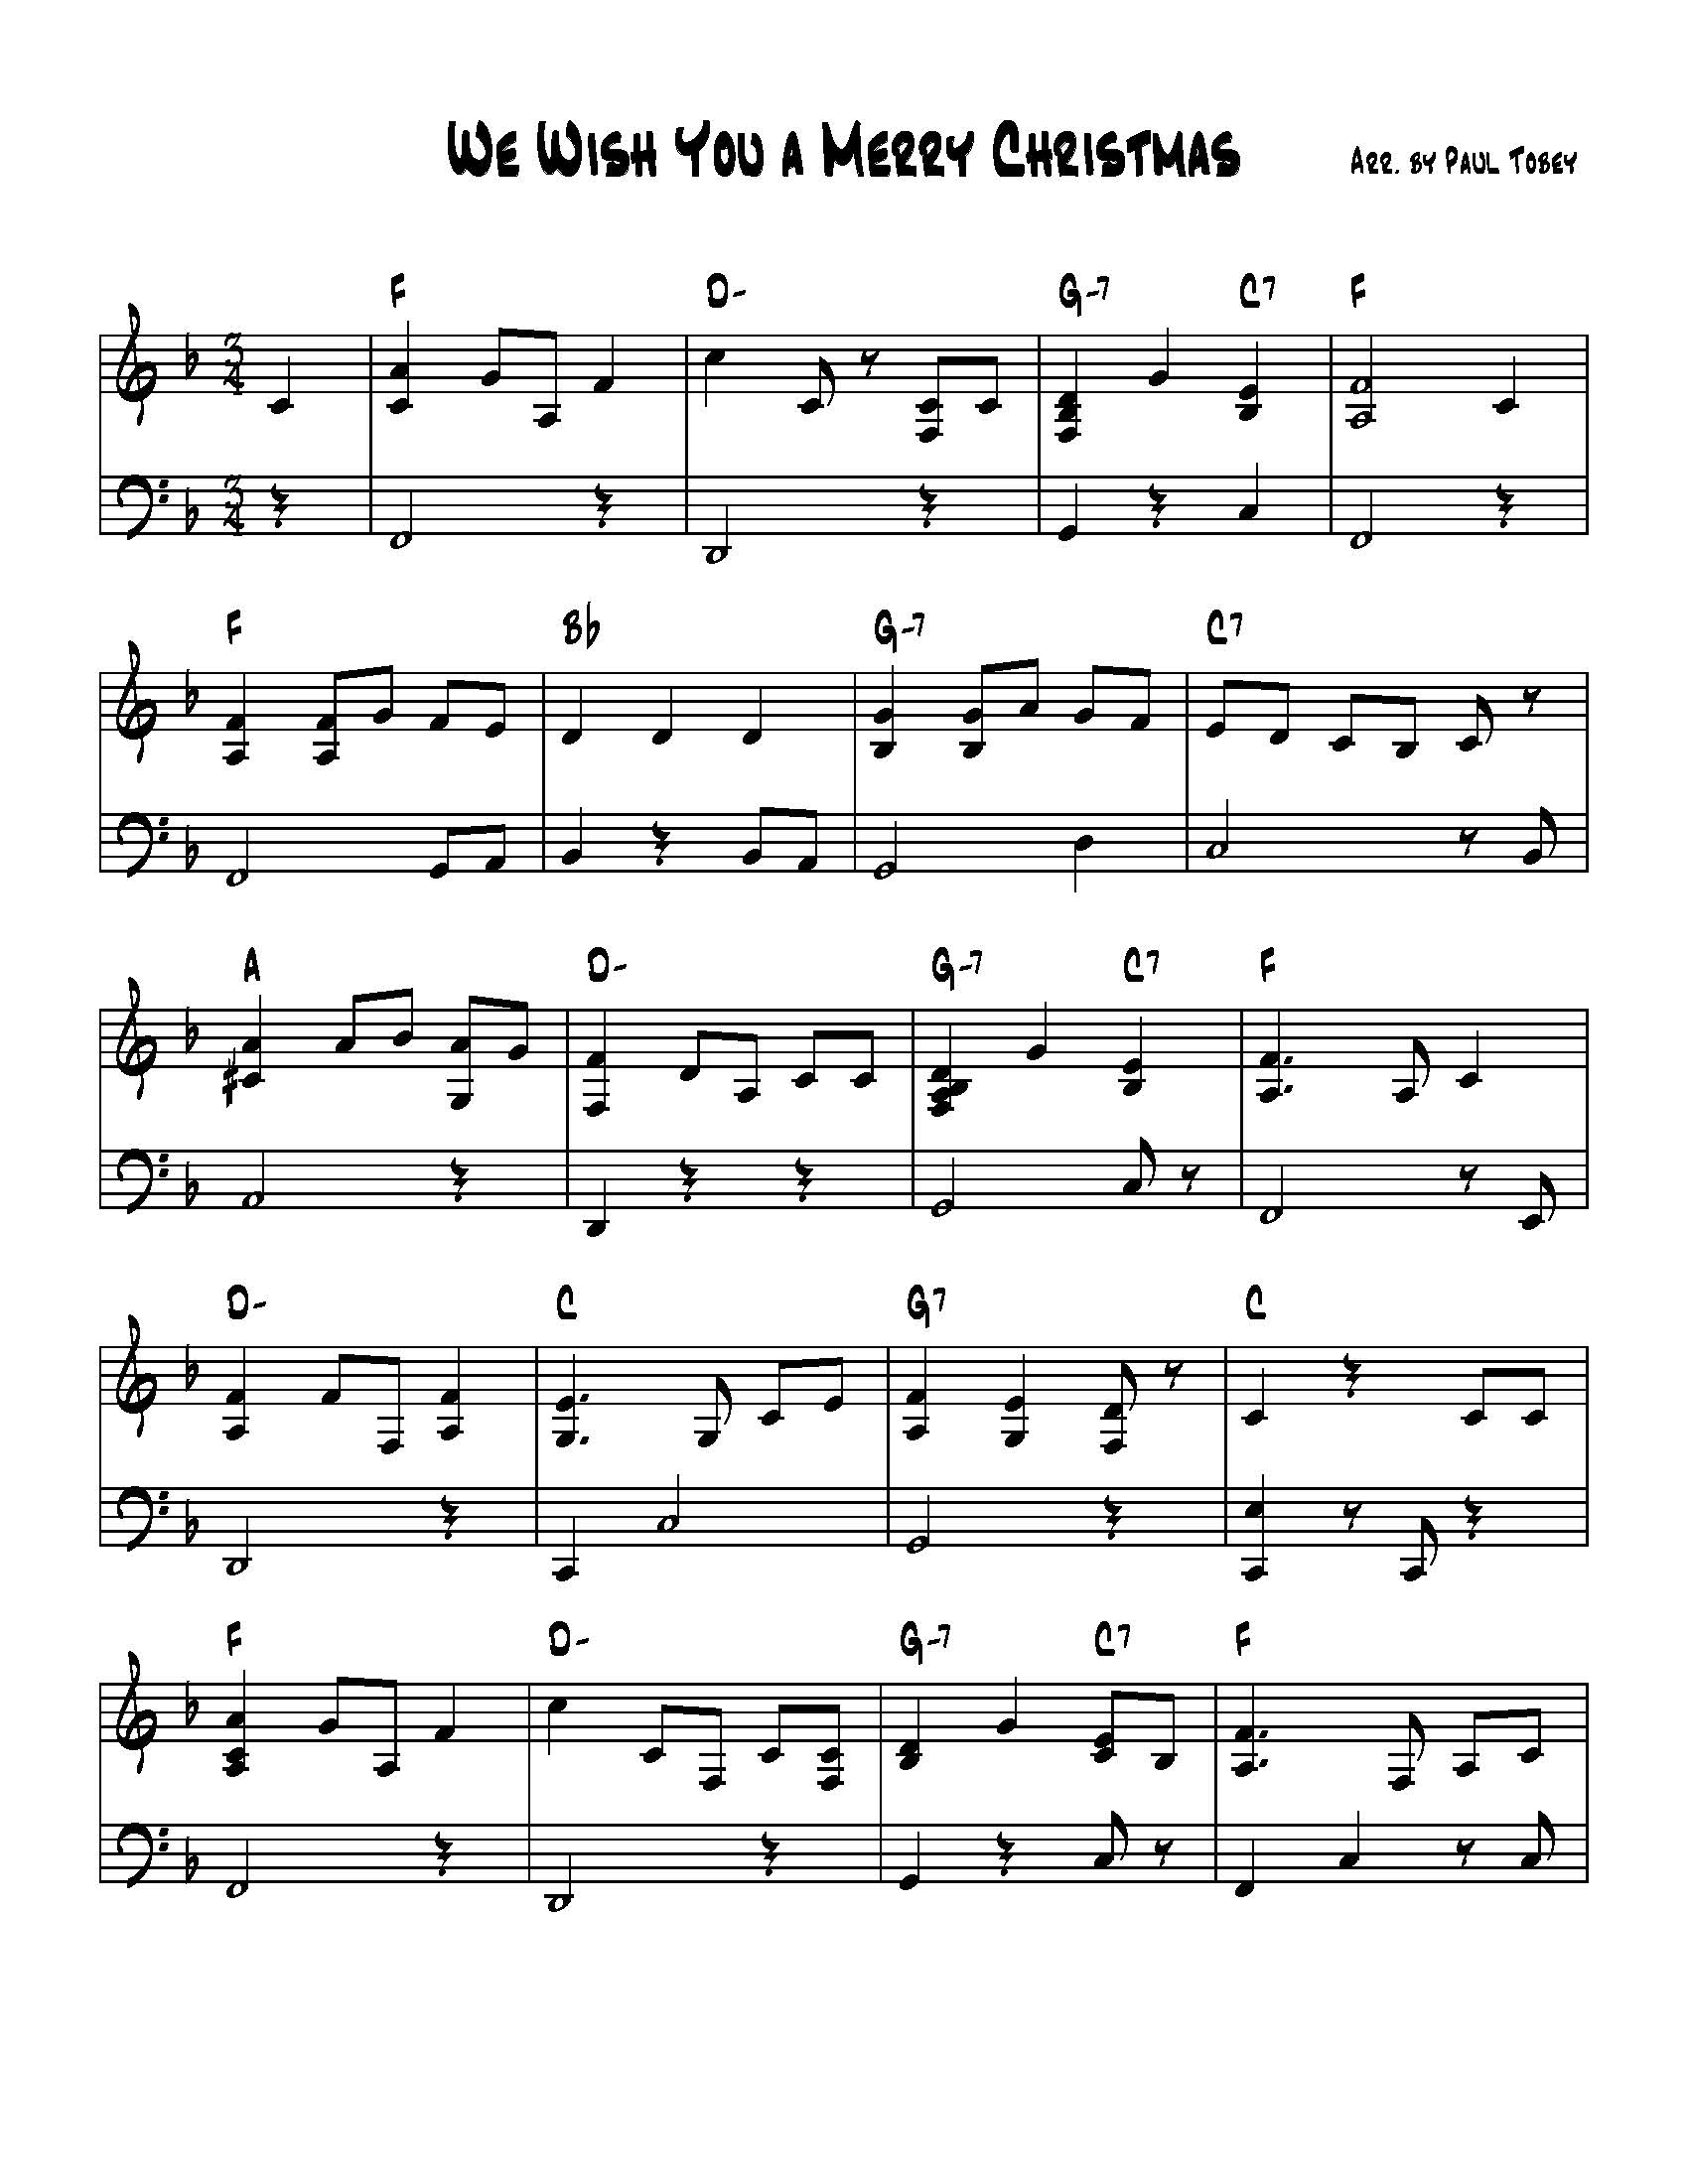 we-wish-you-a-merry-christmas-sheet-music-paul-tobey